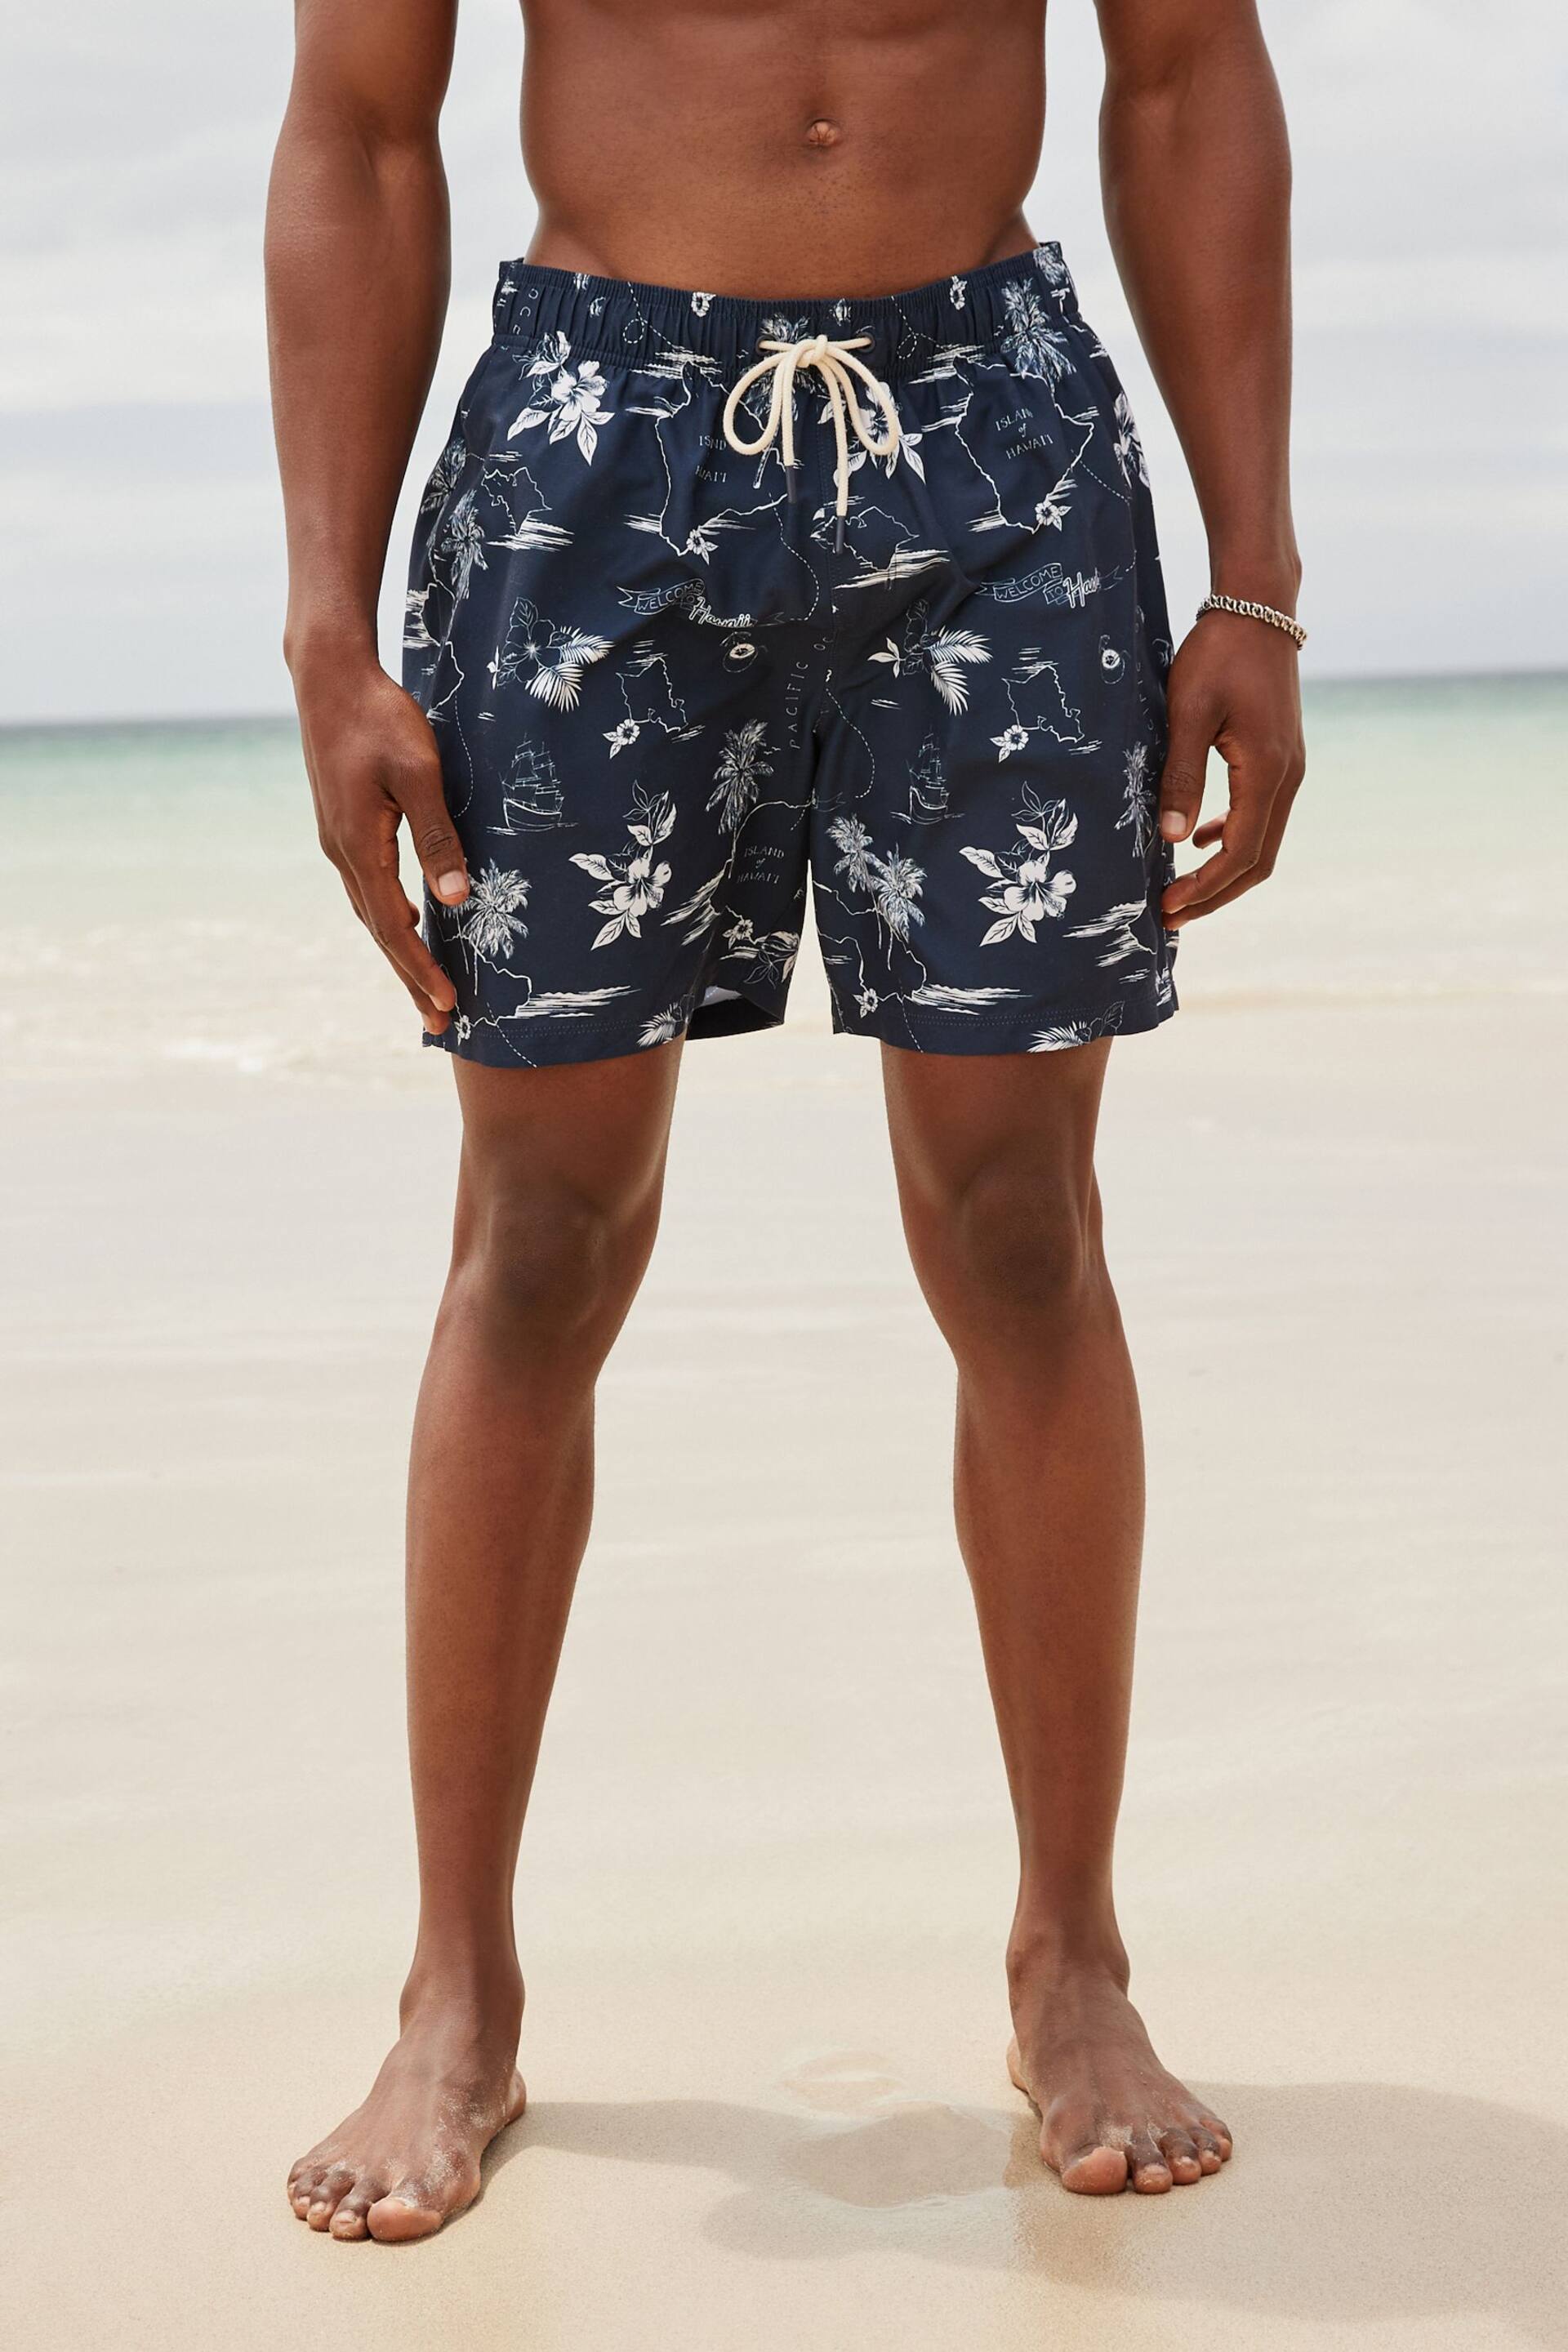 Navy Blue Hawaiian Relaxed Fit Printed Swim Shorts - Image 4 of 11